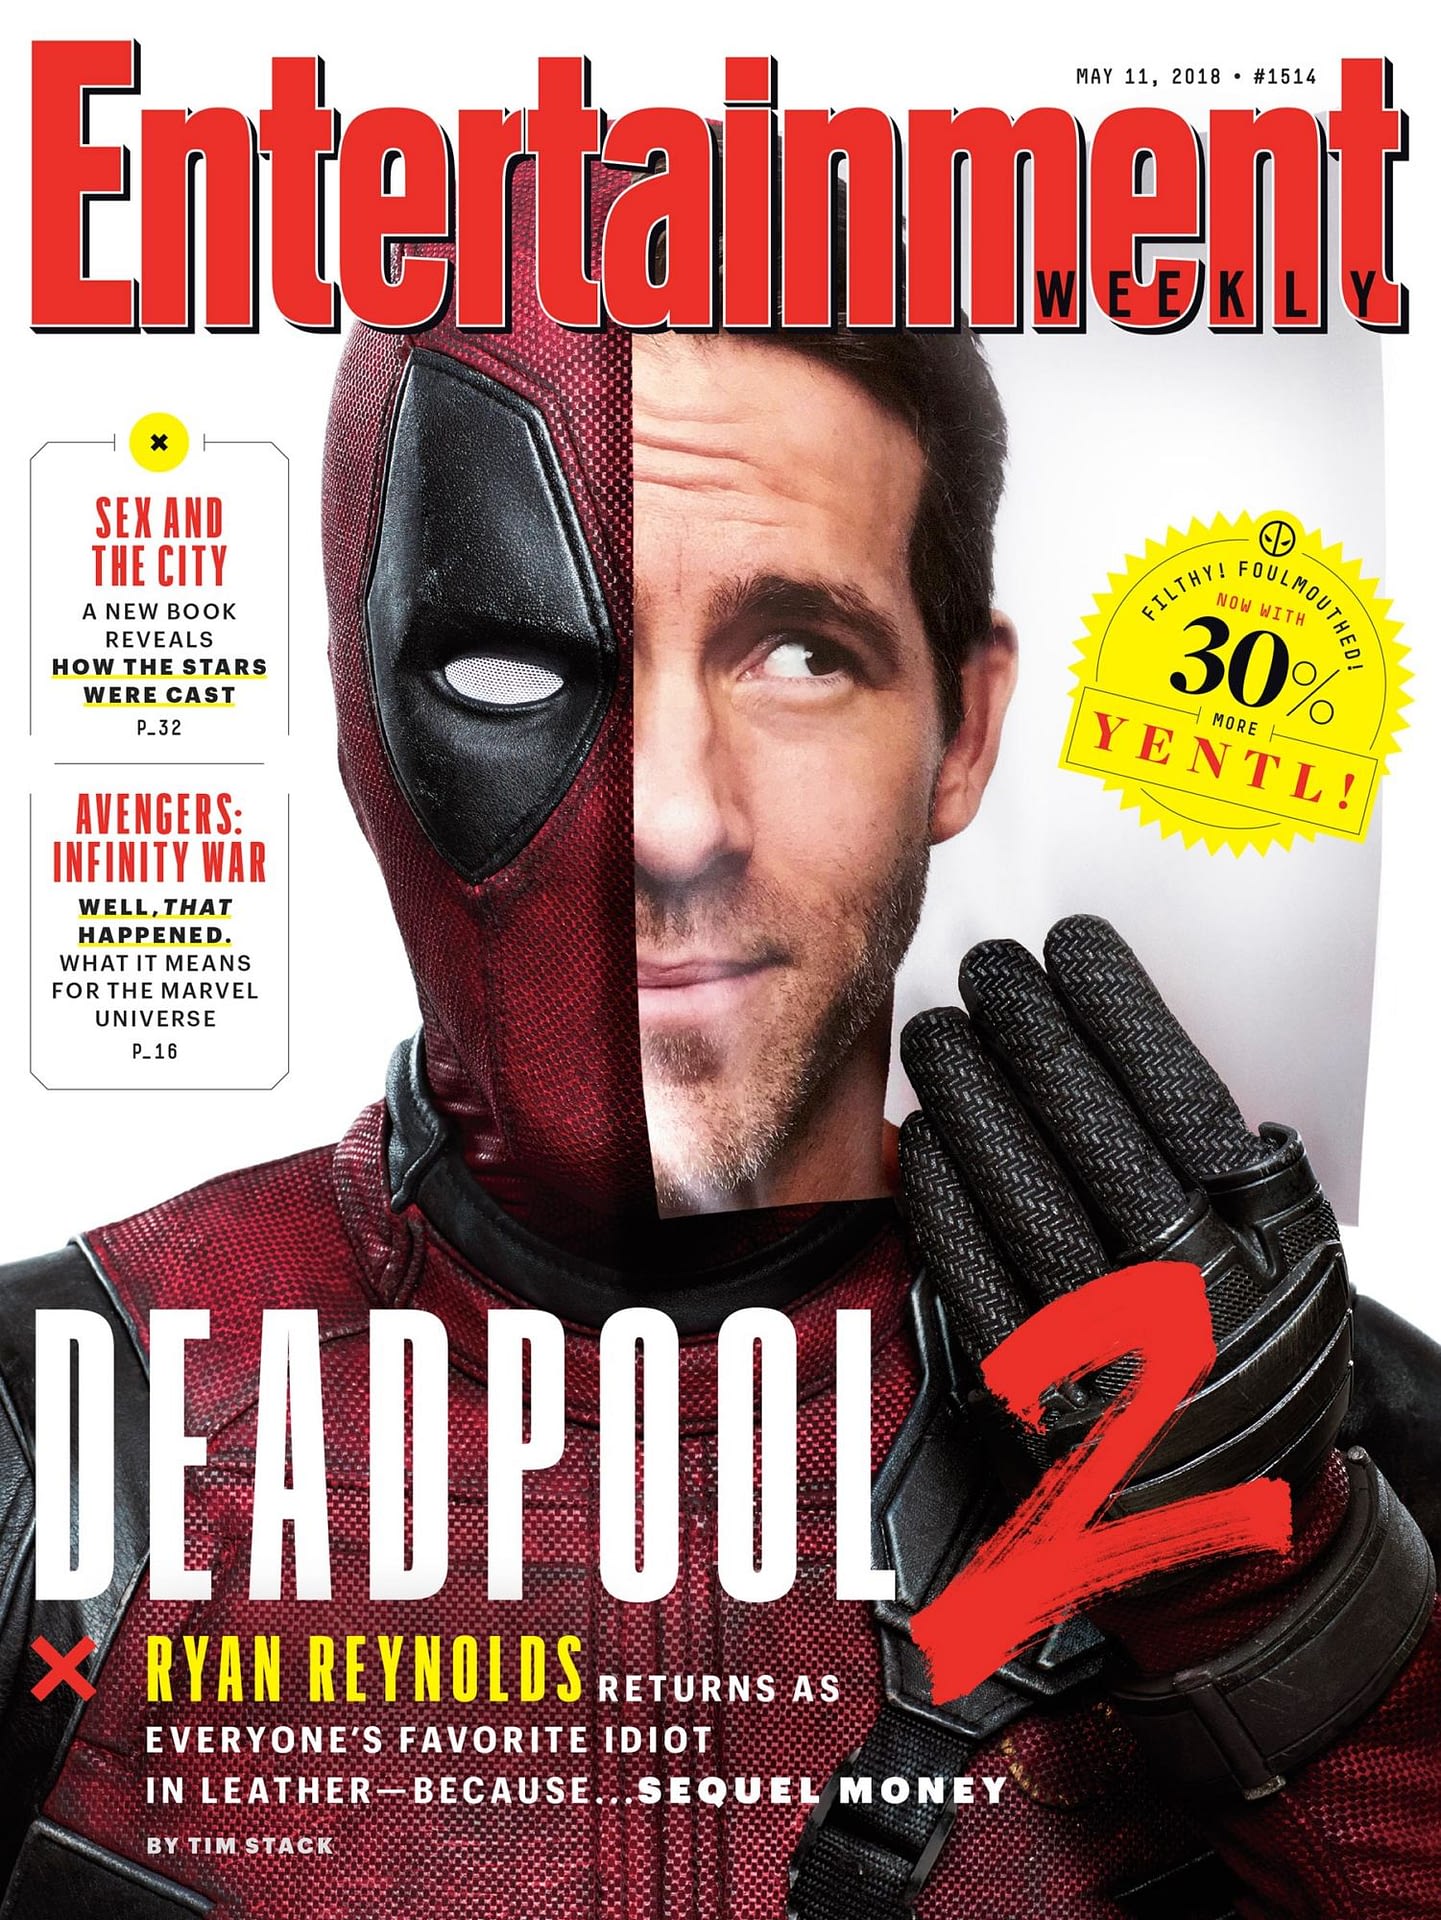 Deadpool 2 Covers Entertainment Weekly